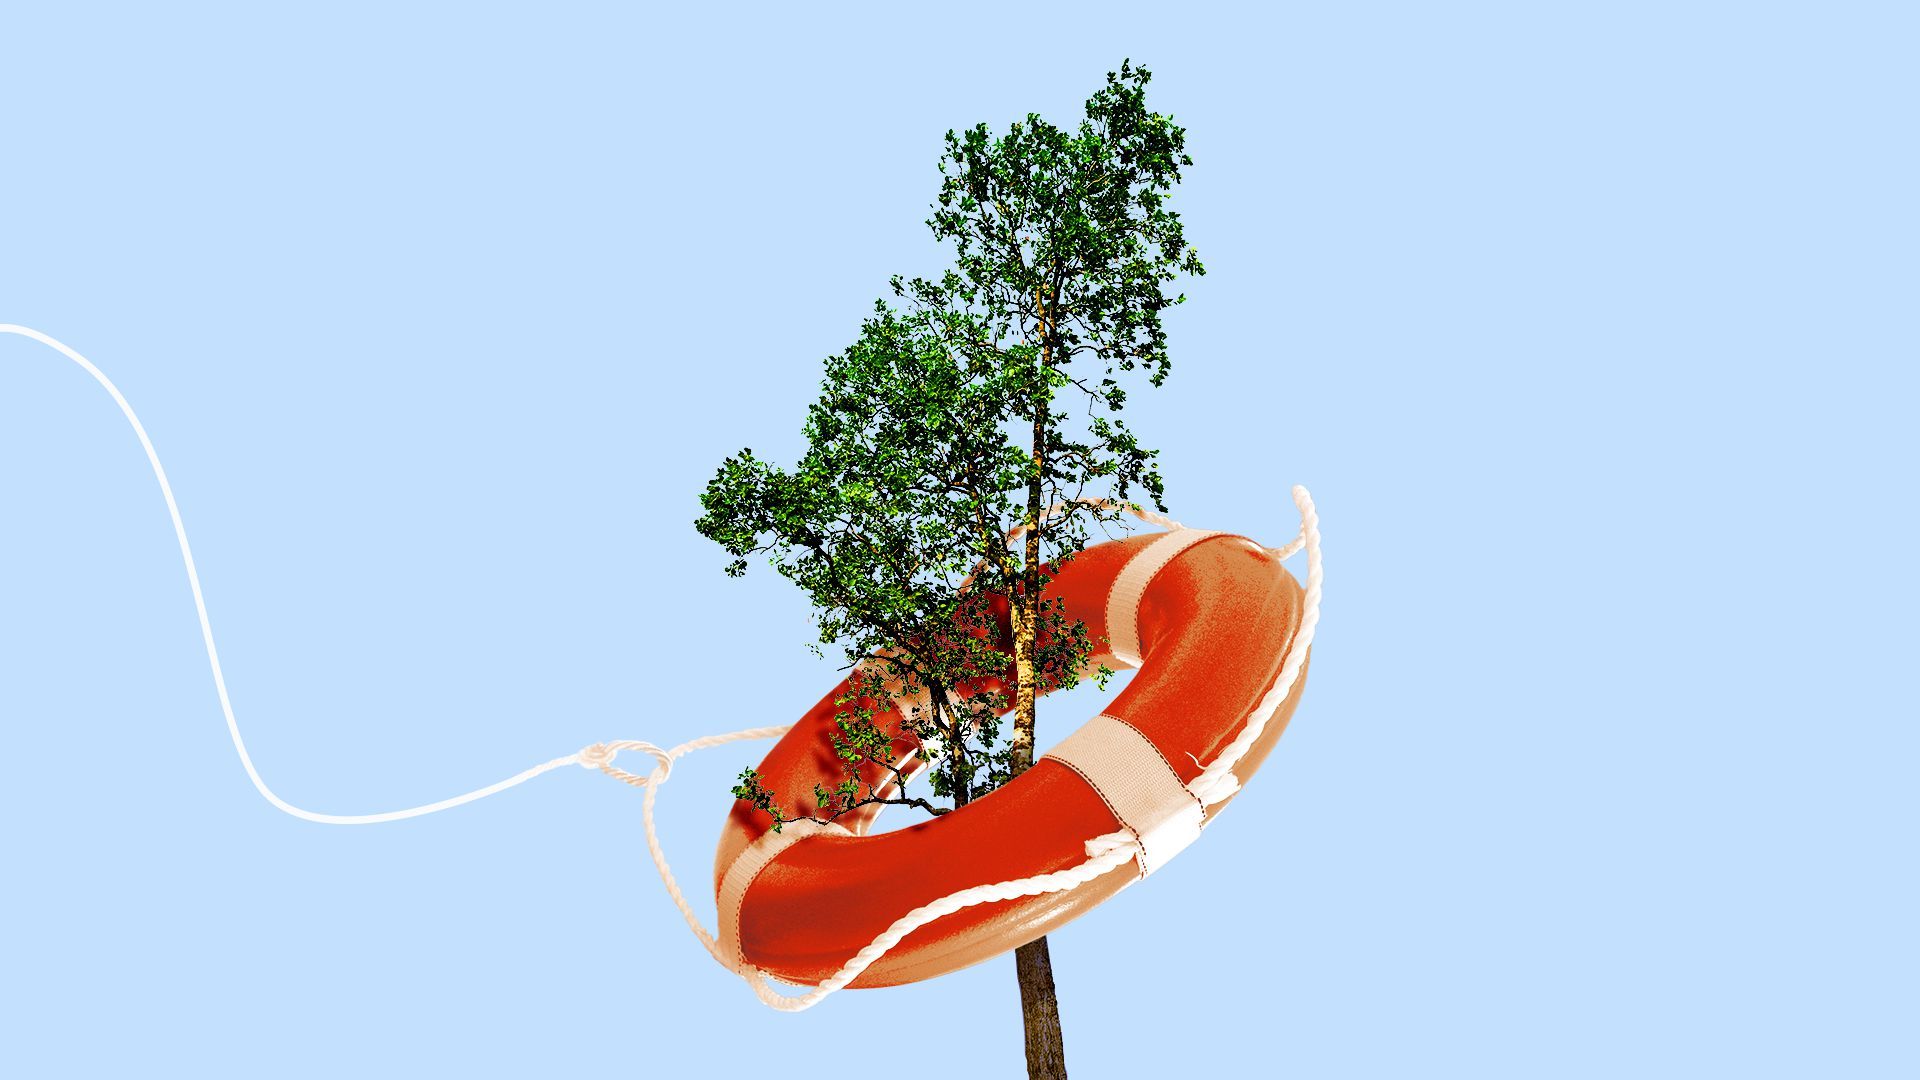 Illustration of a floatation device lifesaver wrapped around a tree